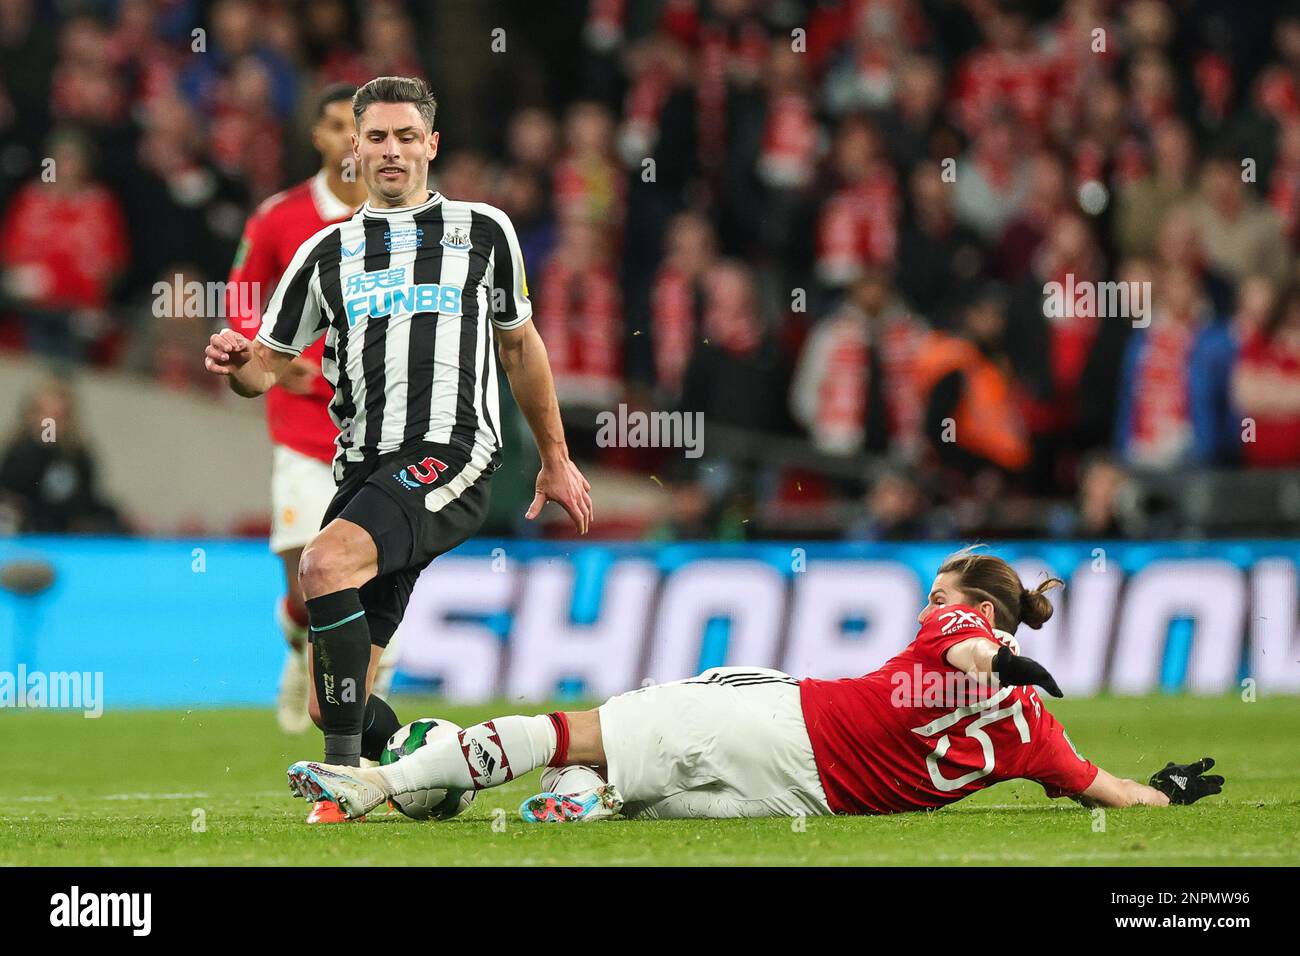 Fabian Schär #5 of Newcastle United is tackled by Marcel Sabitzer #15 of Manchester United during the Carabao Cup Final match Manchester United vs Newcastle United at Wembley Stadium, London, United Kingdom, 26th February 2023 (Photo by Mark Cosgrove/News Images) in, on 2/26/2023. (Photo by Mark Cosgrove/News Images/Sipa USA) Credit: Sipa USA/Alamy Live News Stock Photo